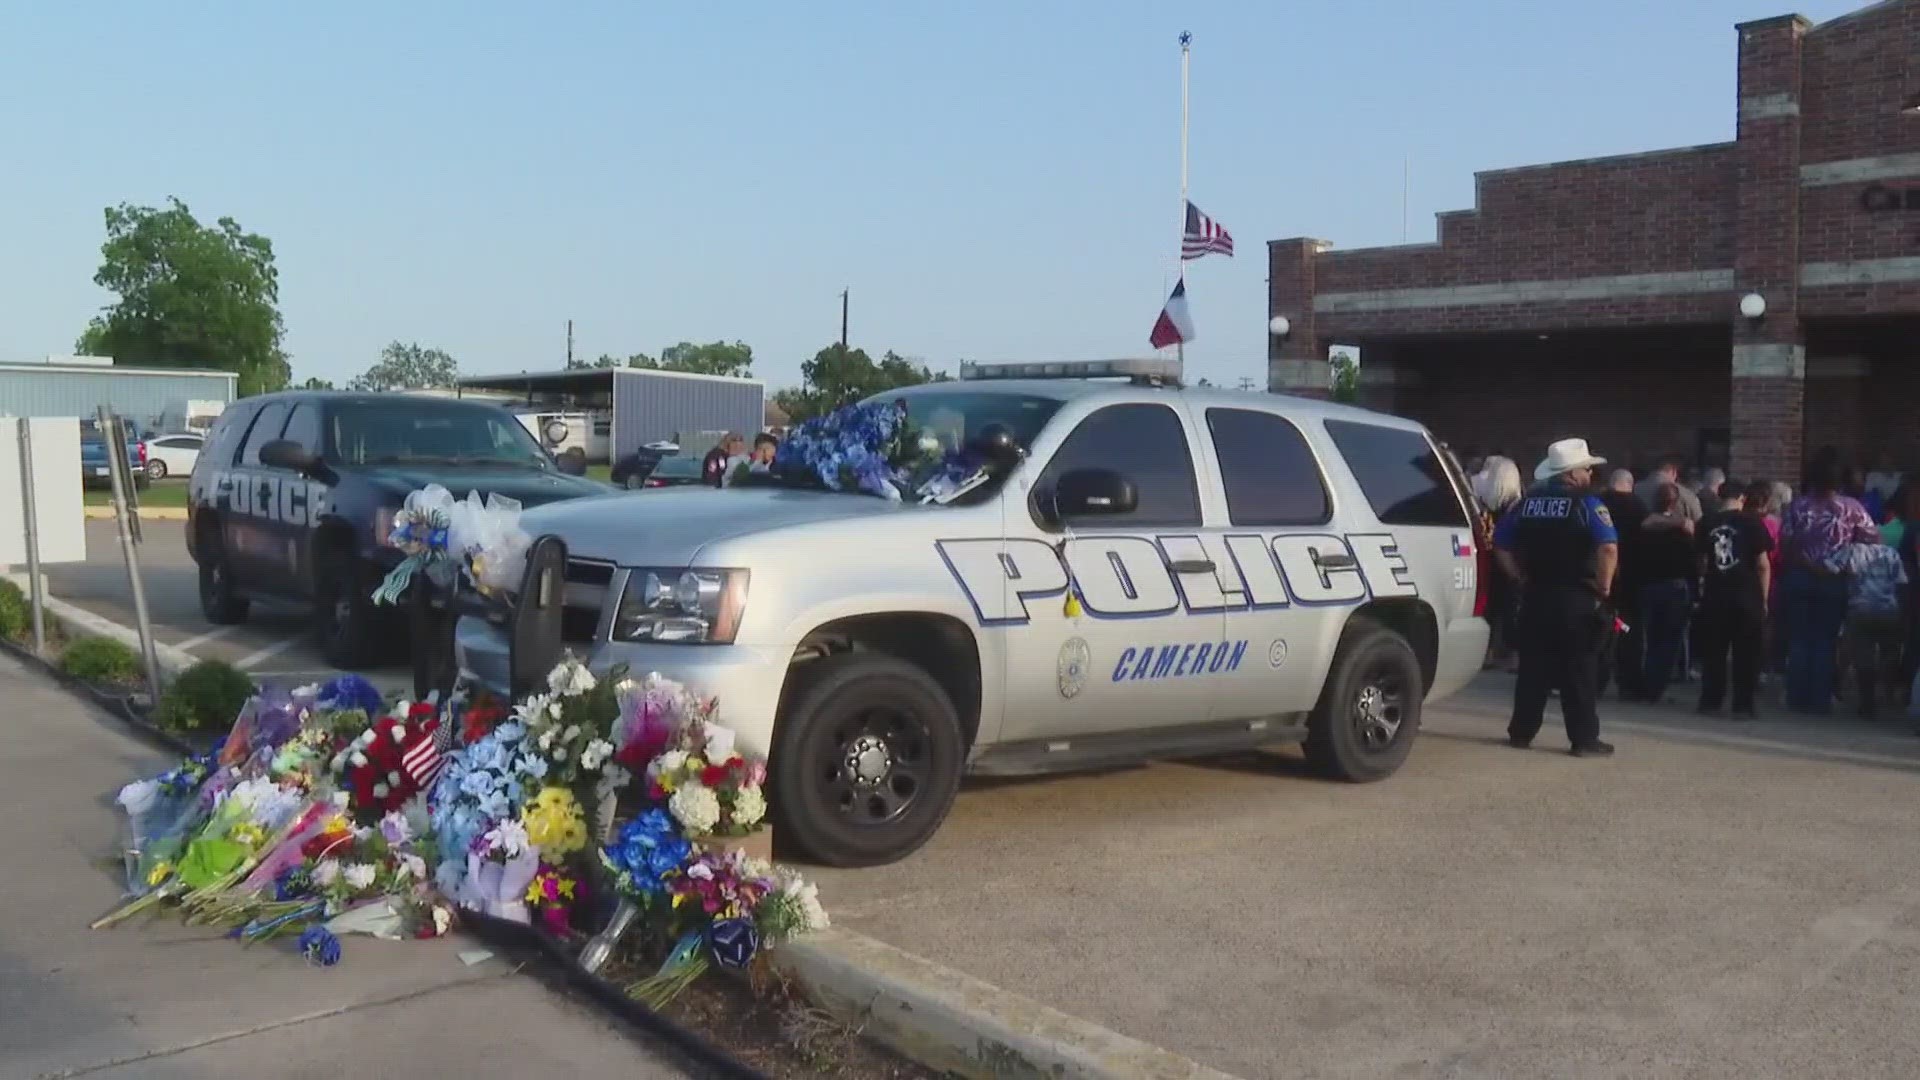 The funeral for Sergeant Joshua Clouse will be at the Bell County Expo Center at 3:00 p.m.